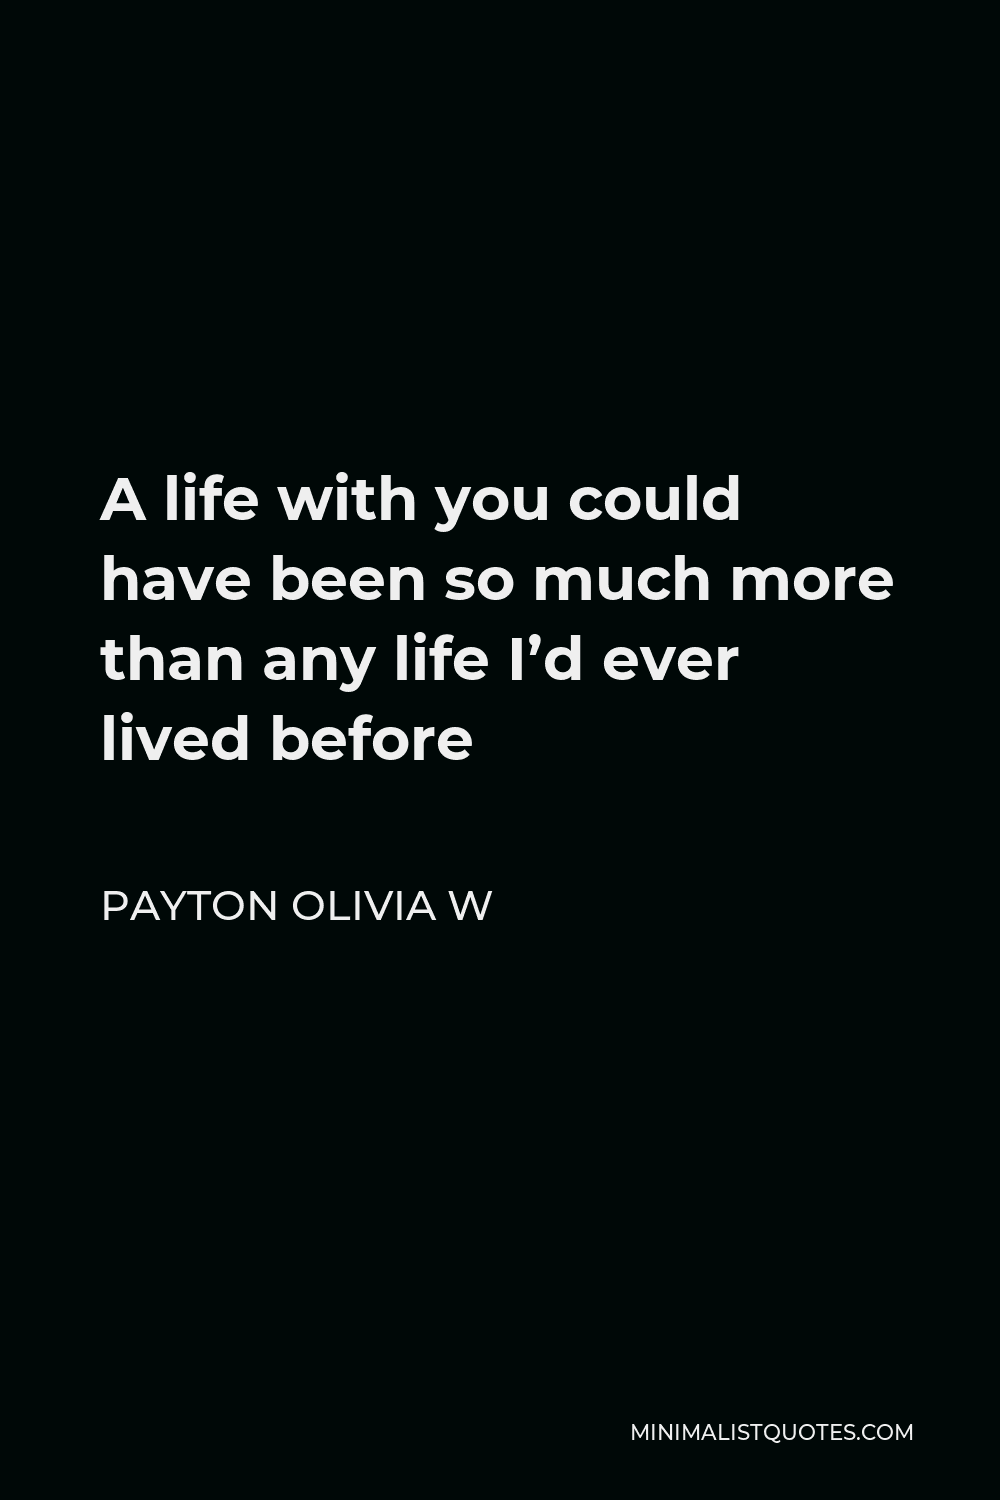 Payton Olivia W Quote - A life with you could have been so much more than any life I’d ever lived before